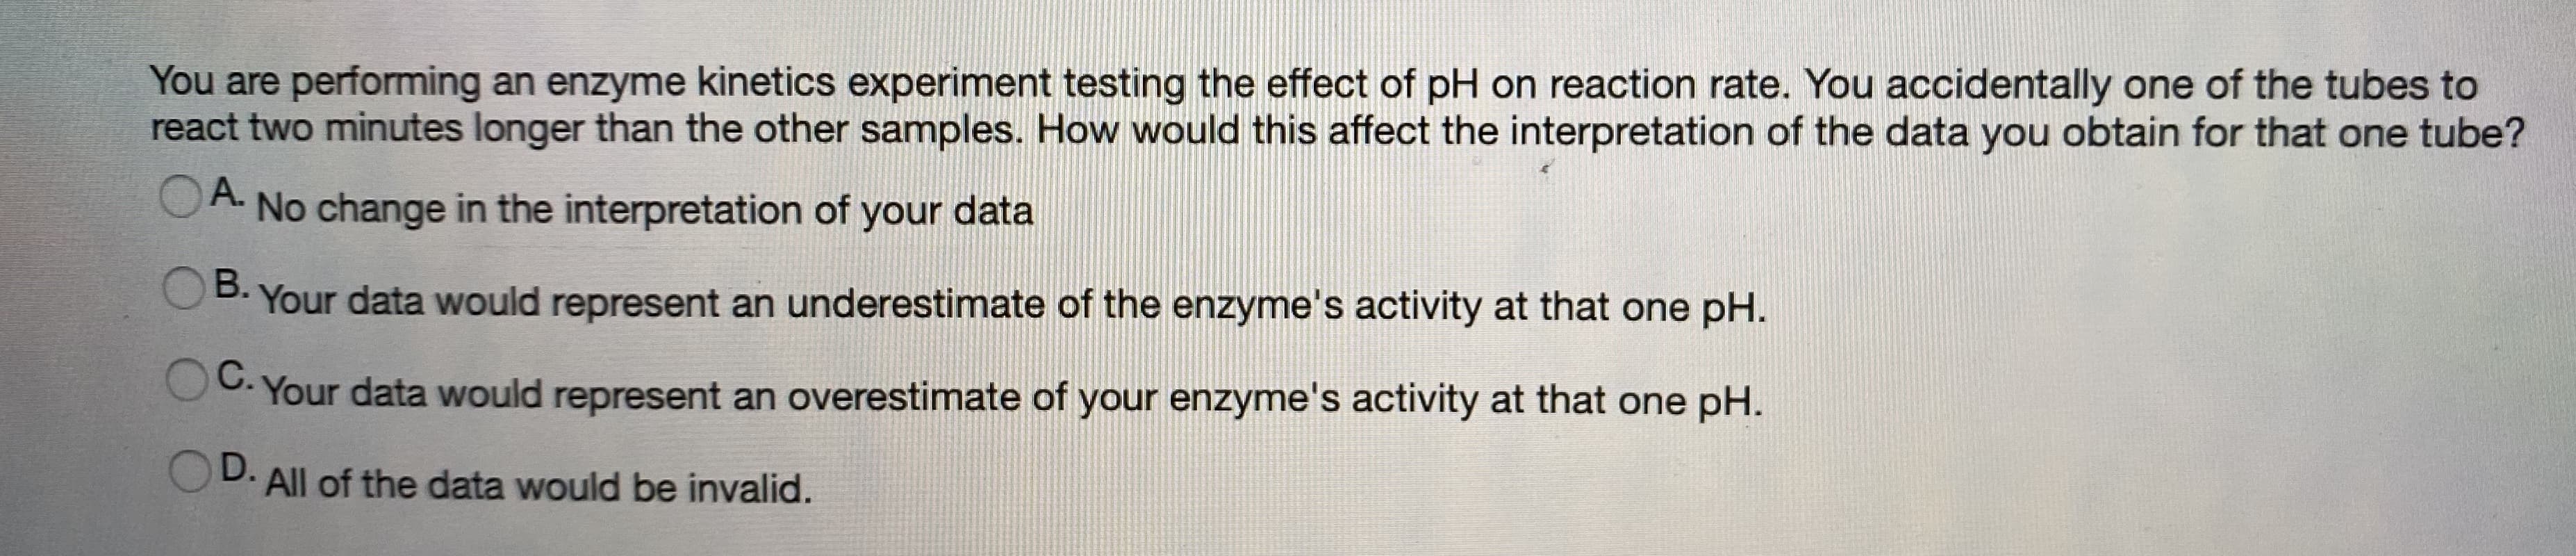 You are performing an enzyme kinetics experiment testing the effect of pH on reaction rate. You accidentally one of the tubes to
react two minutes longer than the other samples. How would this affect the interpretation of the data you obtain for that one tube?
A.
No change in the interpretation of your data
OB. Your data would represent an underestimate of the enzyme's activity at that one pH.
OC. Your data would represent an overestimate of your enzyme's activity at that one pH.
D. All of the data would be invalid.
